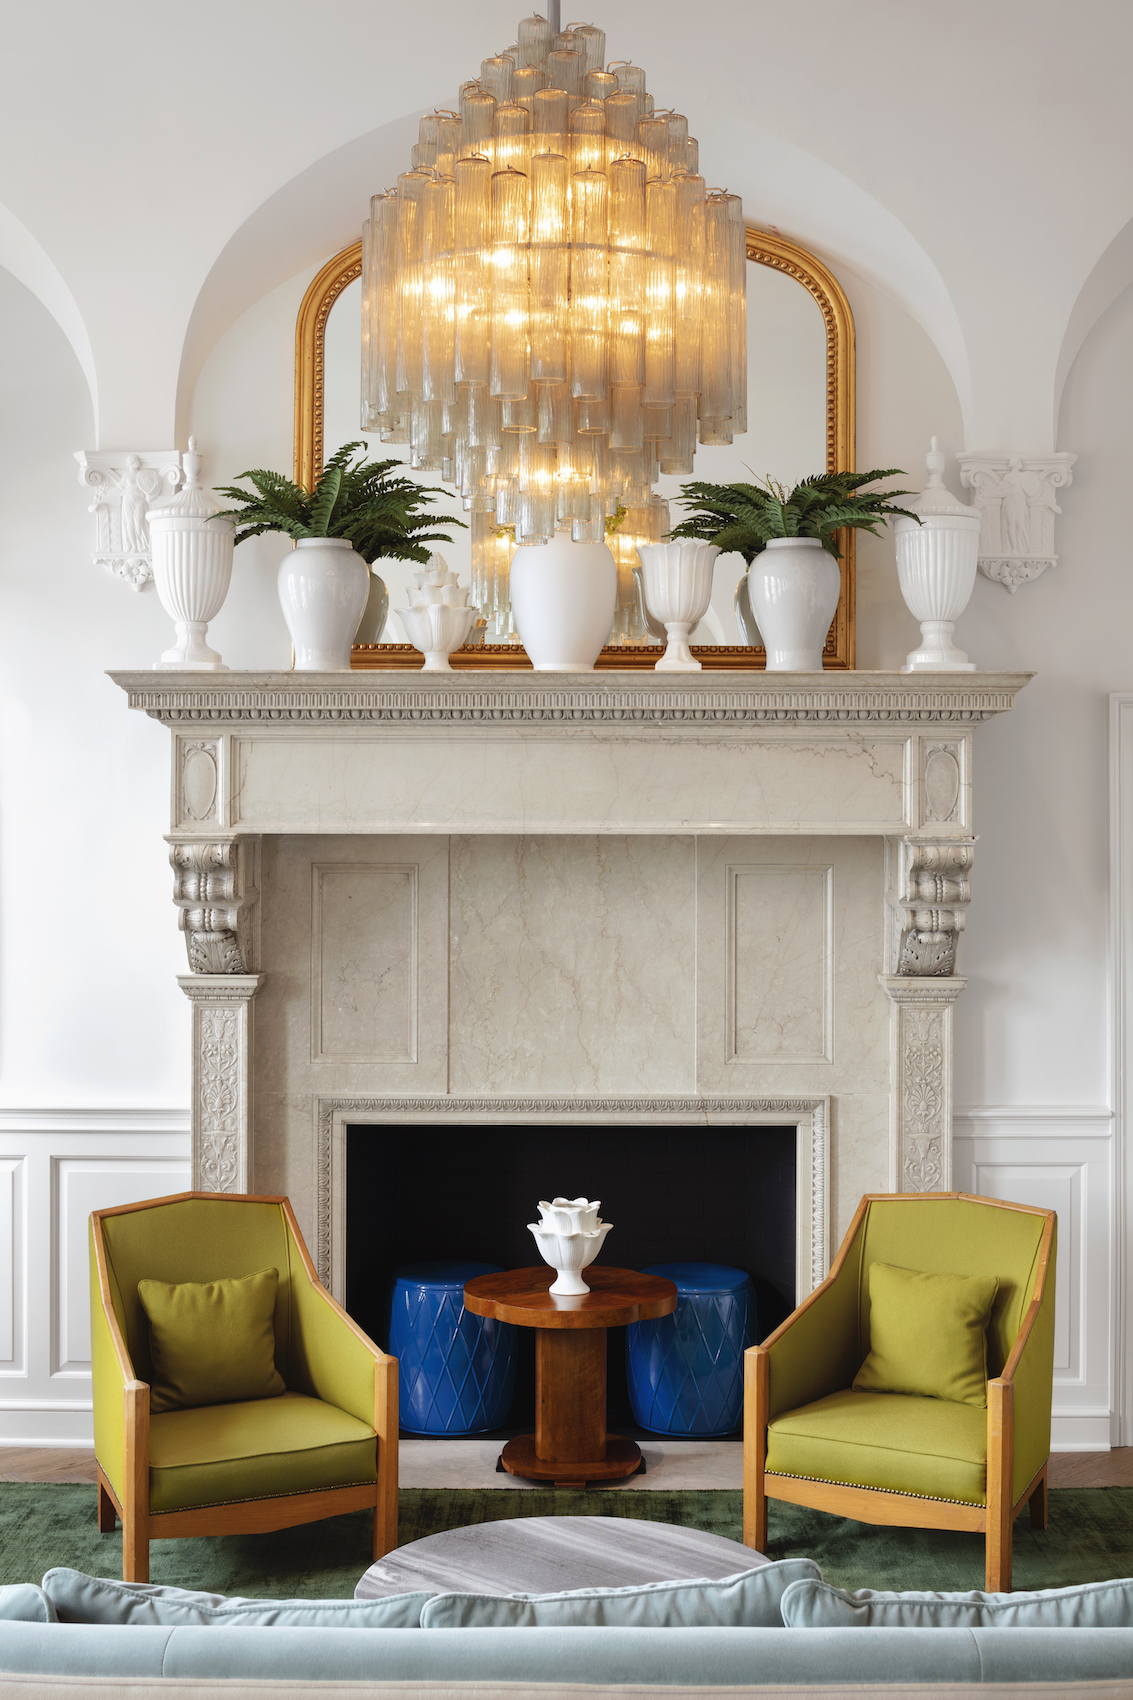 Fireplace in a suite at Riggs Hotel in Washington DC designed by Lore Group creative director Jacu Strauss in Effect Magazine